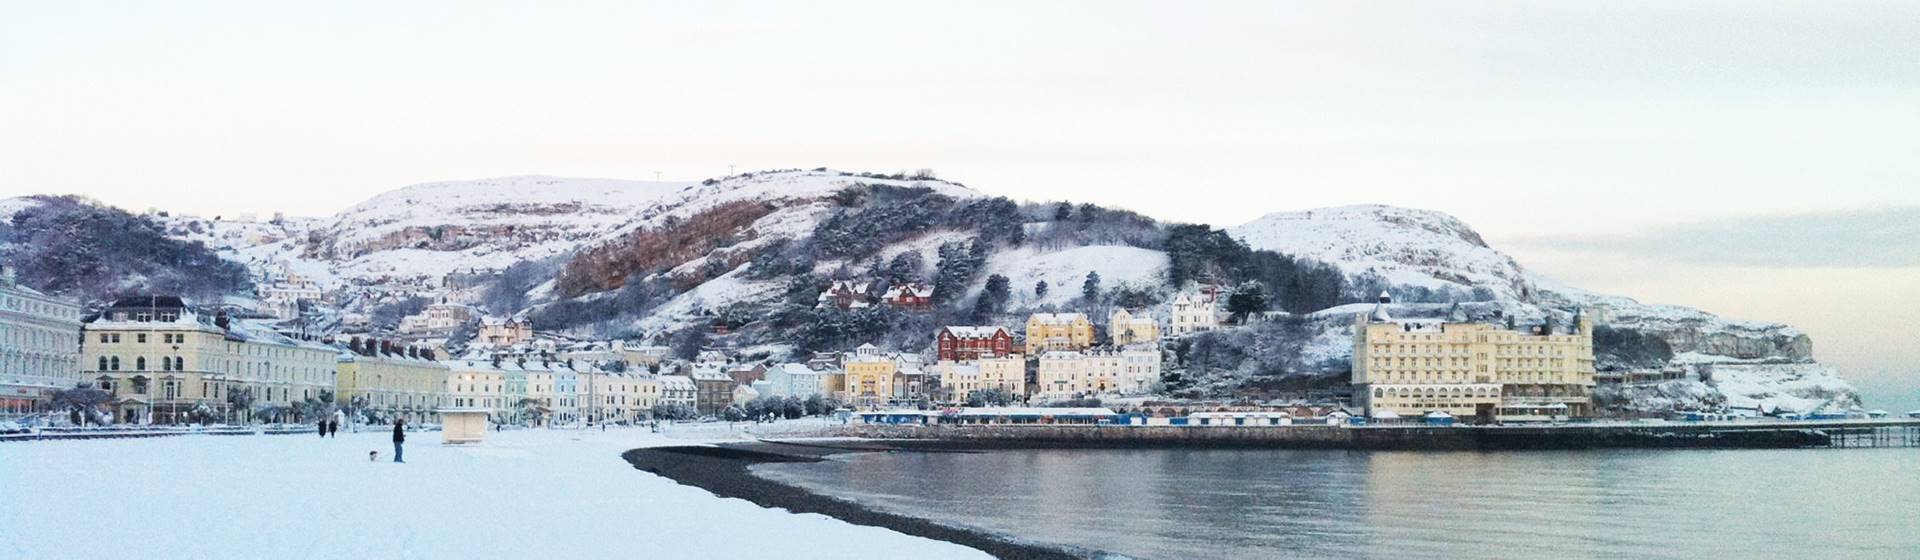 A Warm Welsh Welcome in Llandudno at Christmas